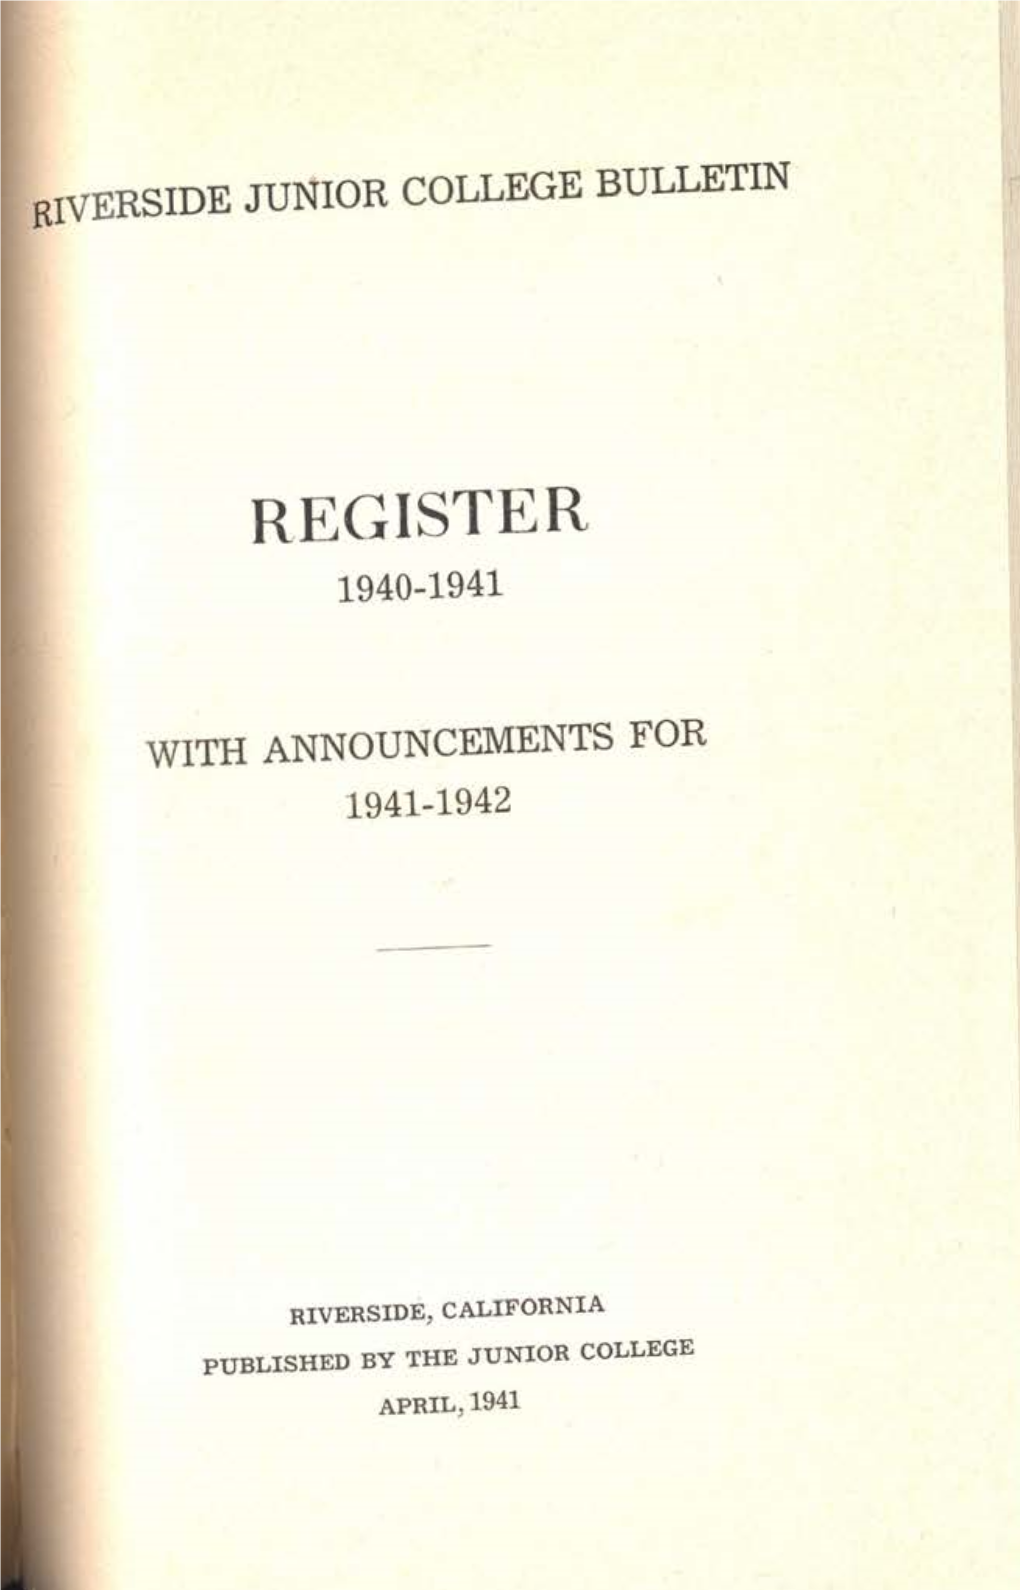 REGISTER 1940-1941 Er Ter with ANNOUNCEMENTS for 1941-1942